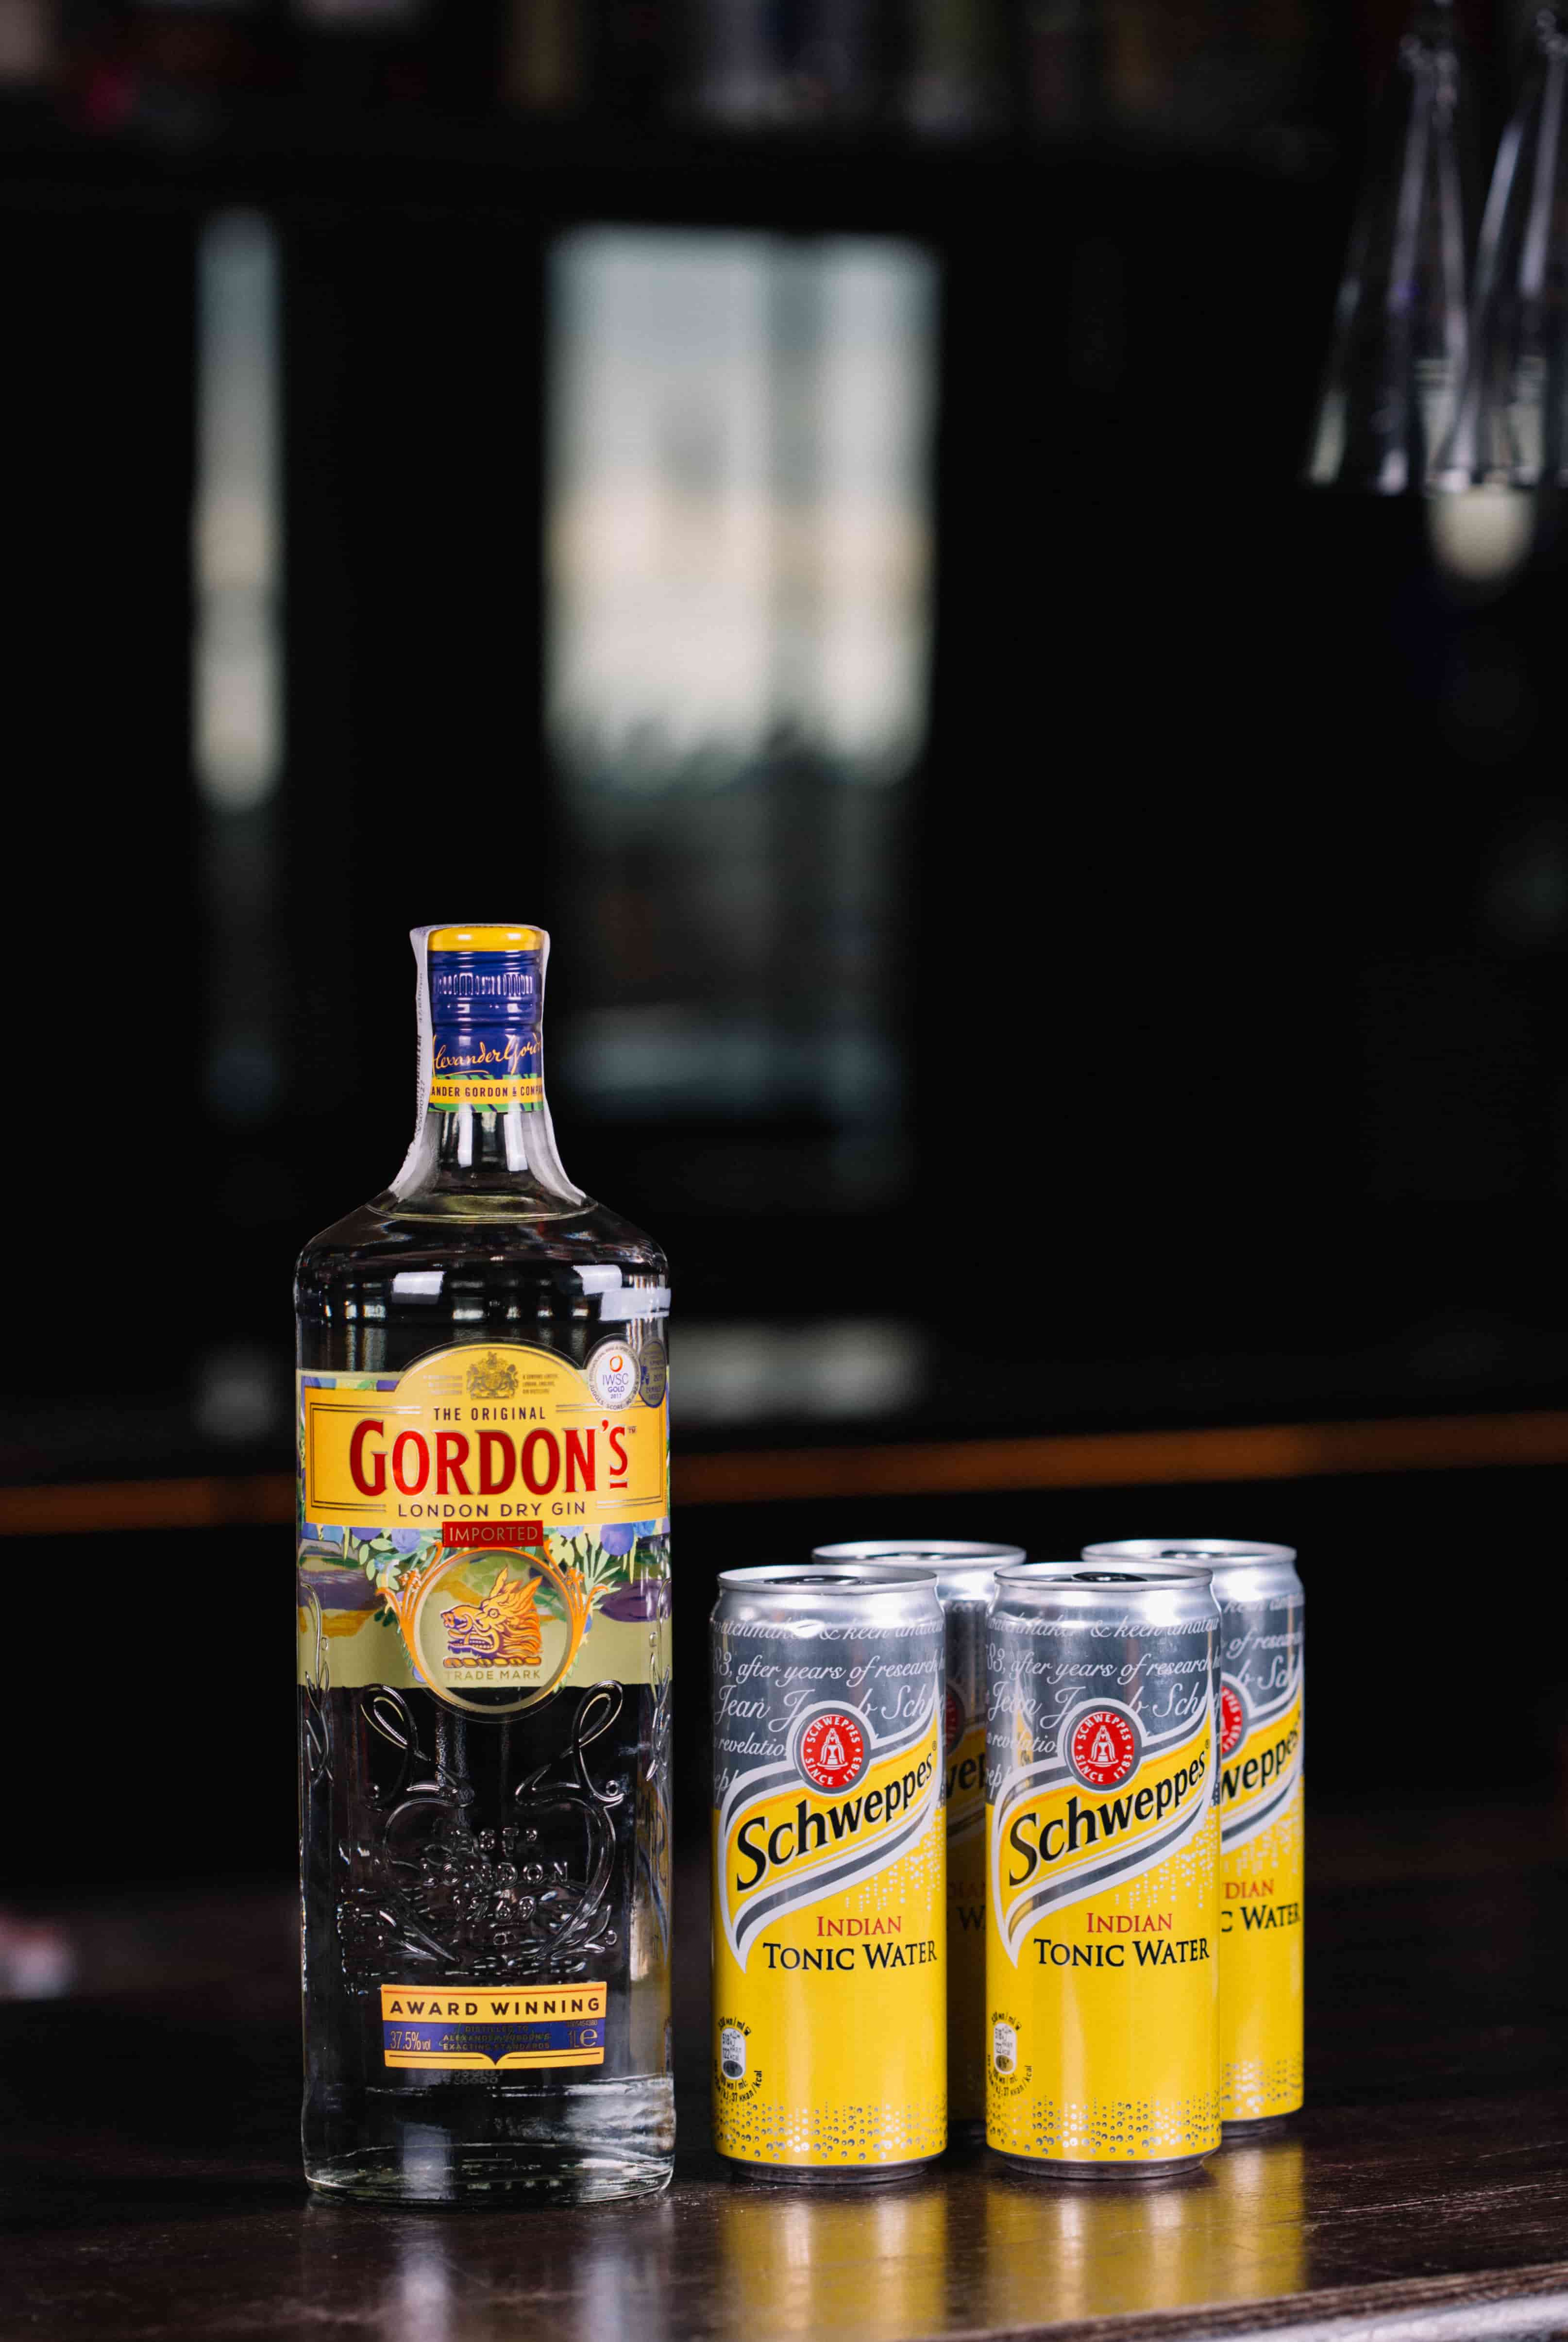 Gordon's and Schweppes Tonic Water